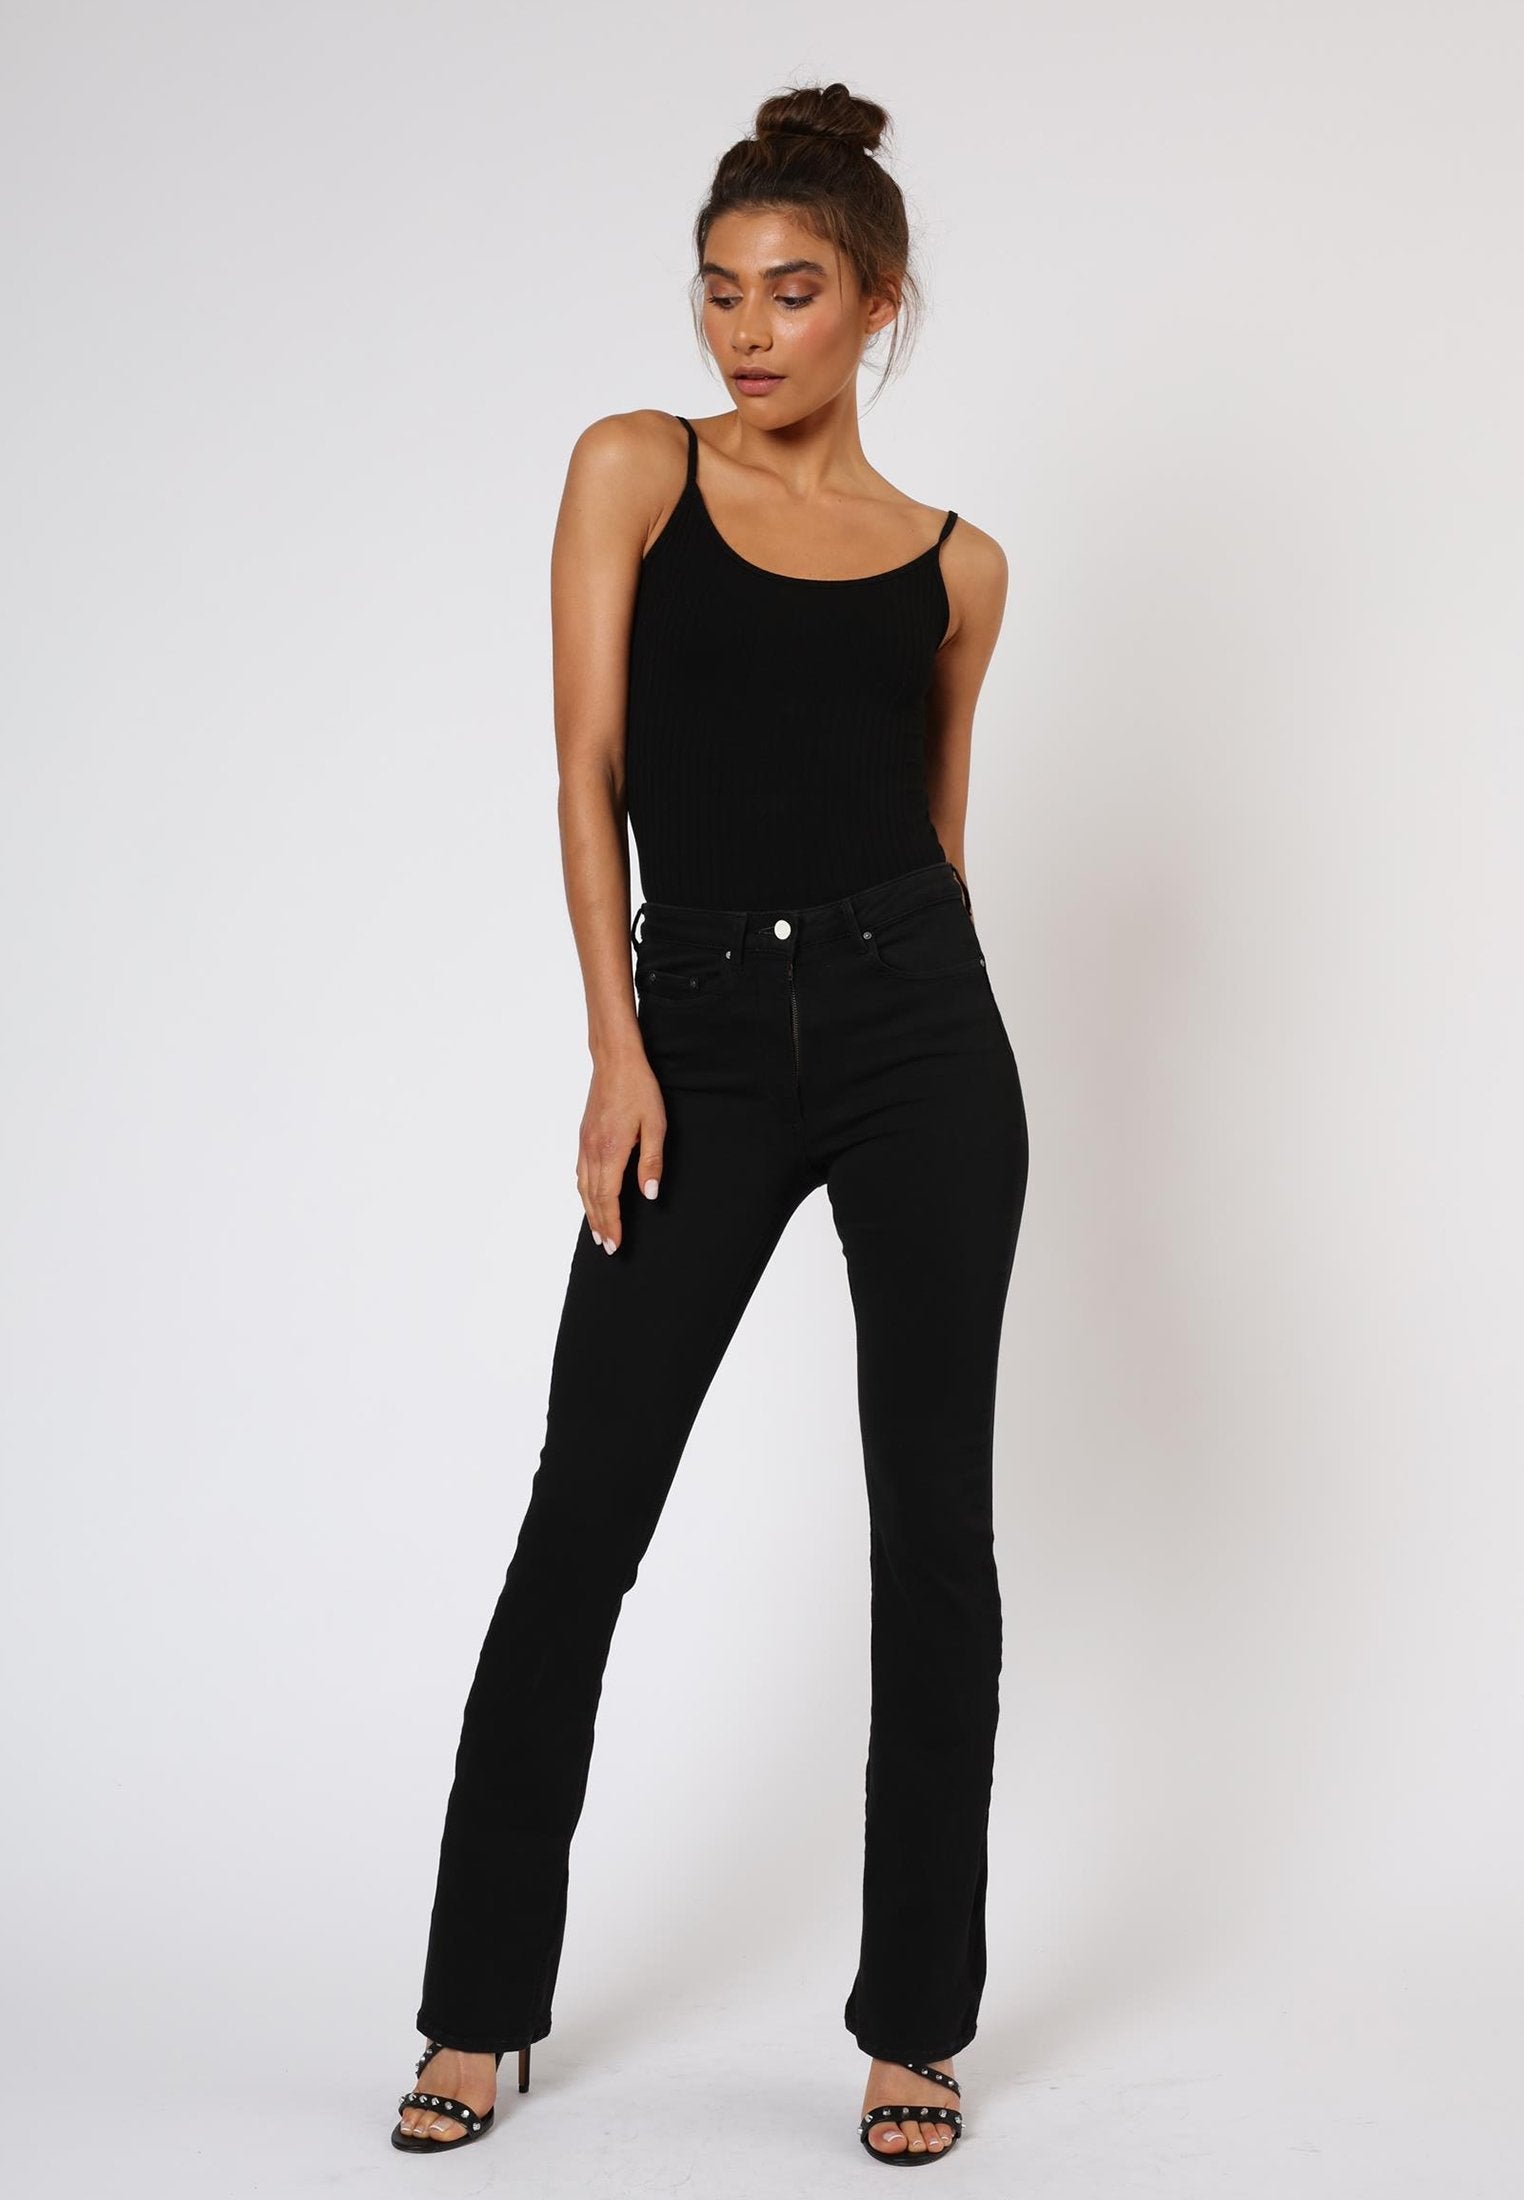 RELIGION Triumph High Waisted Jeans